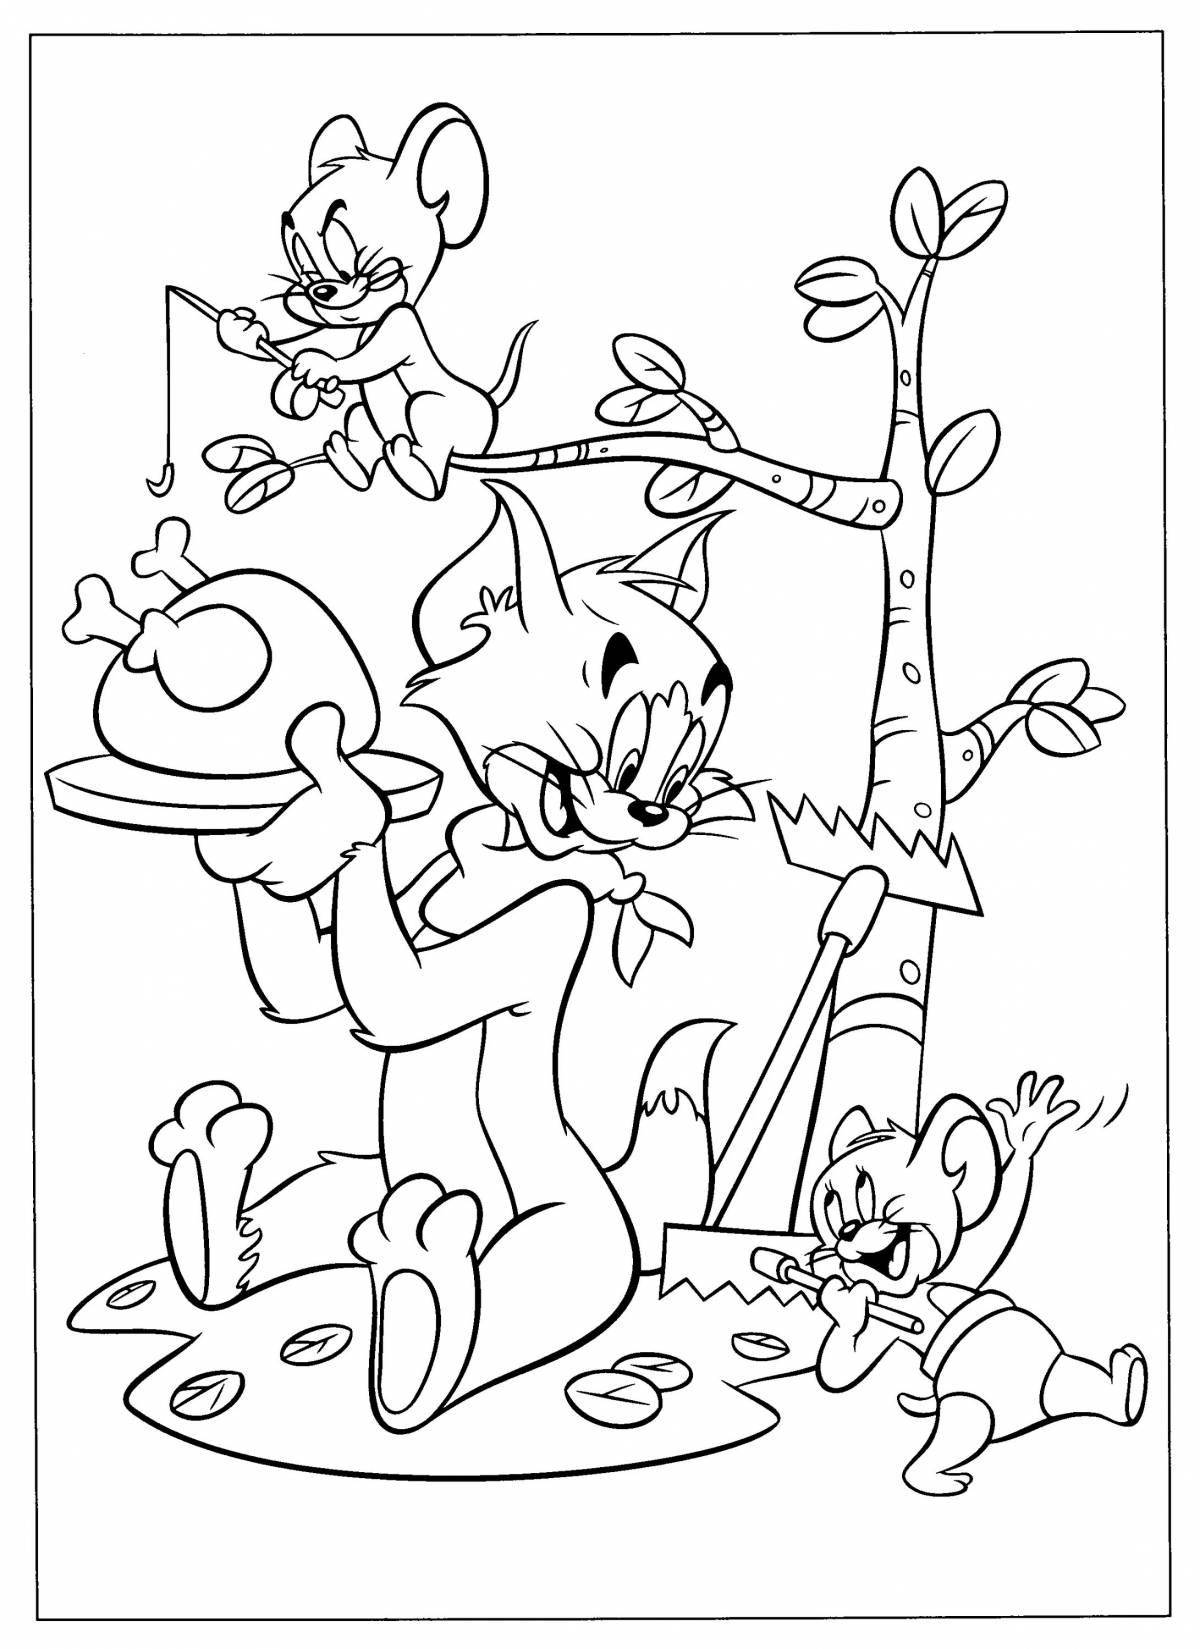 Tom and jerry playful coloring book